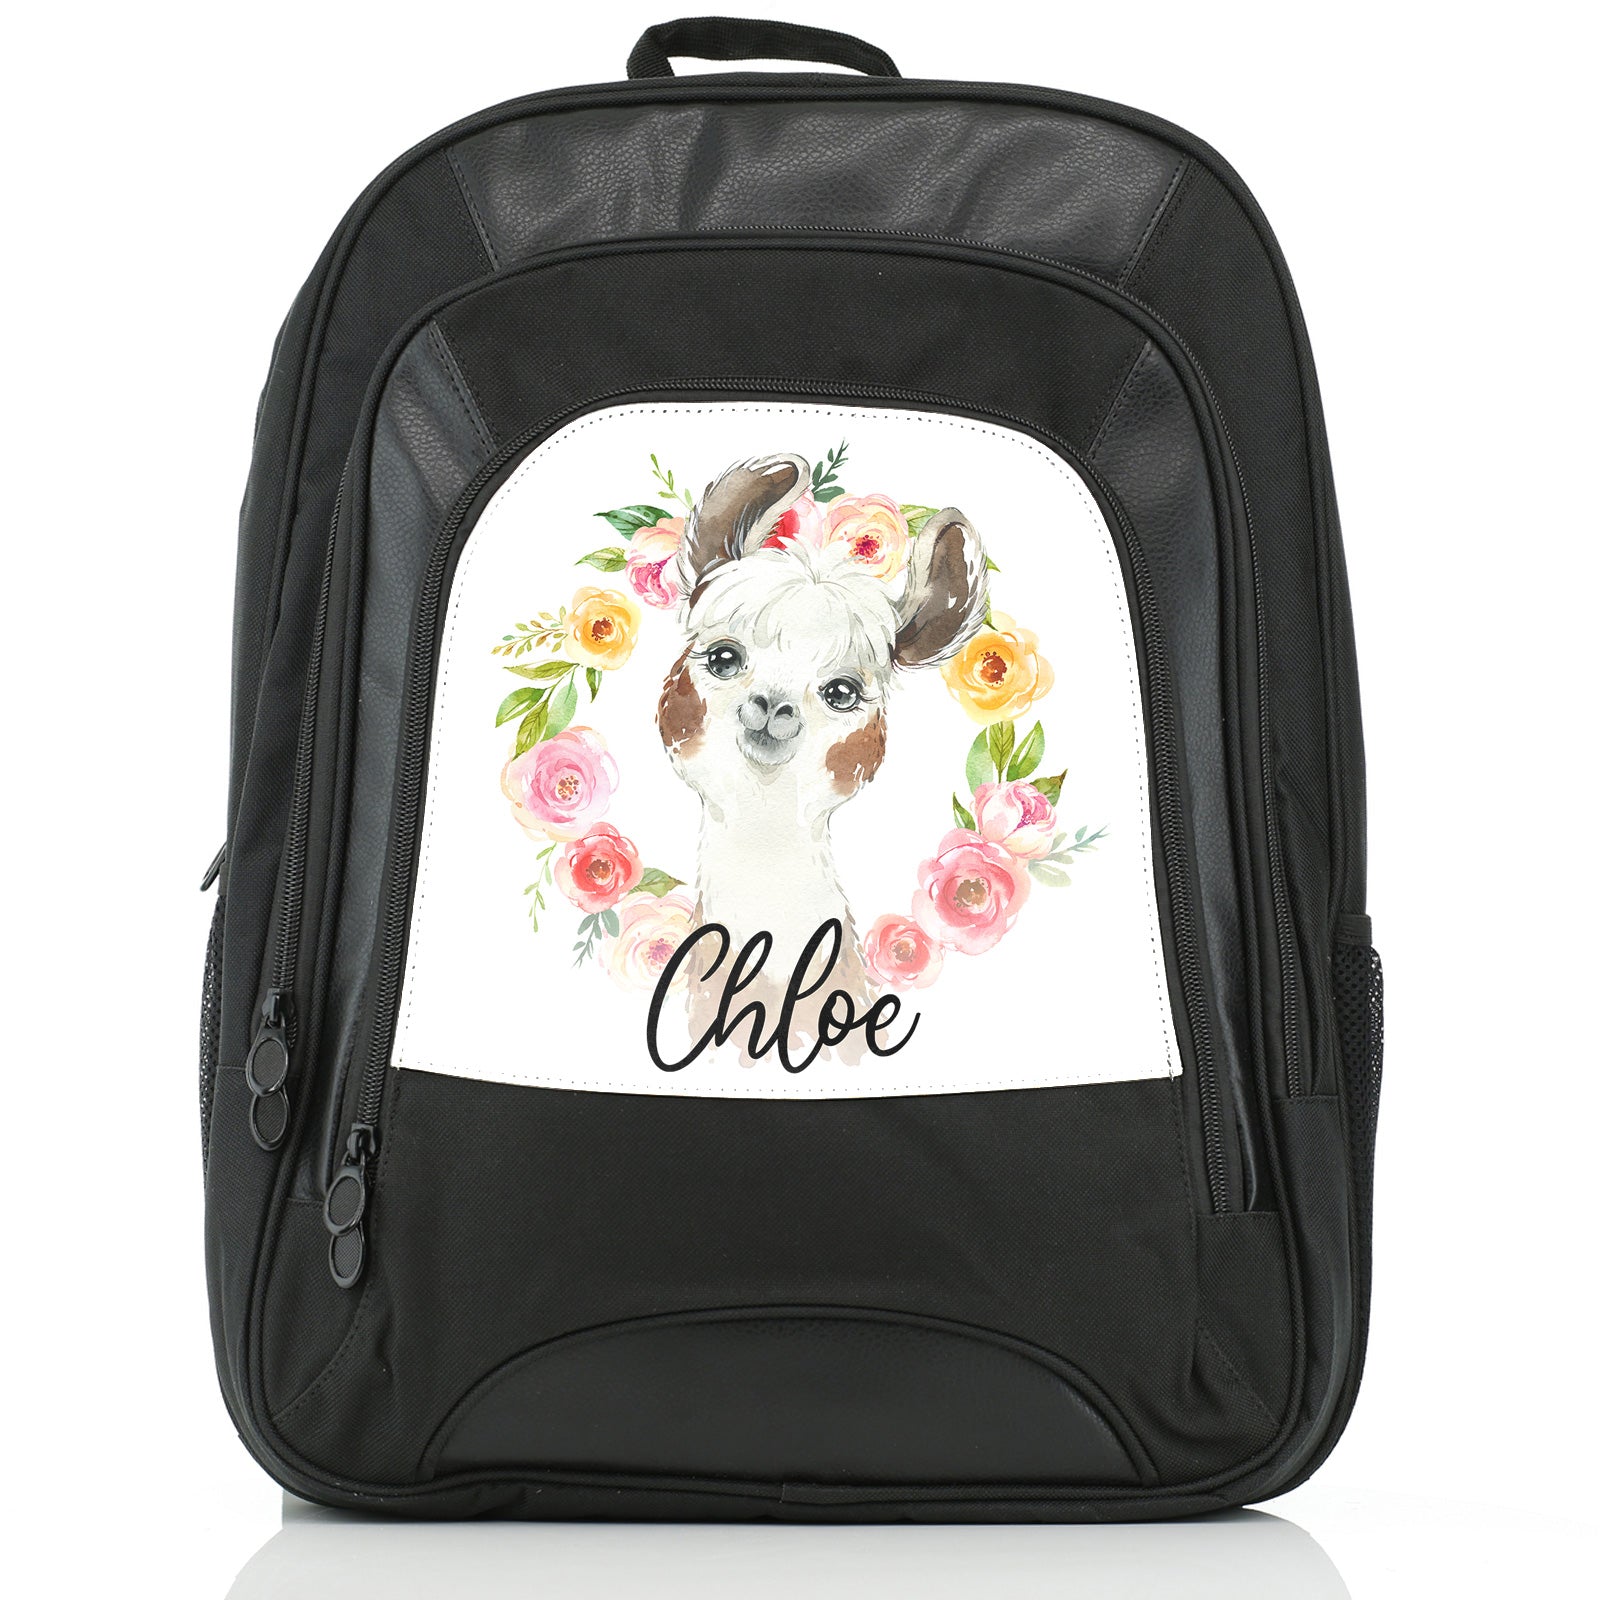 Personalised Large Multifunction Backpack with Brown and White Alpaca Multicolour Flower Wreath and Cute Text